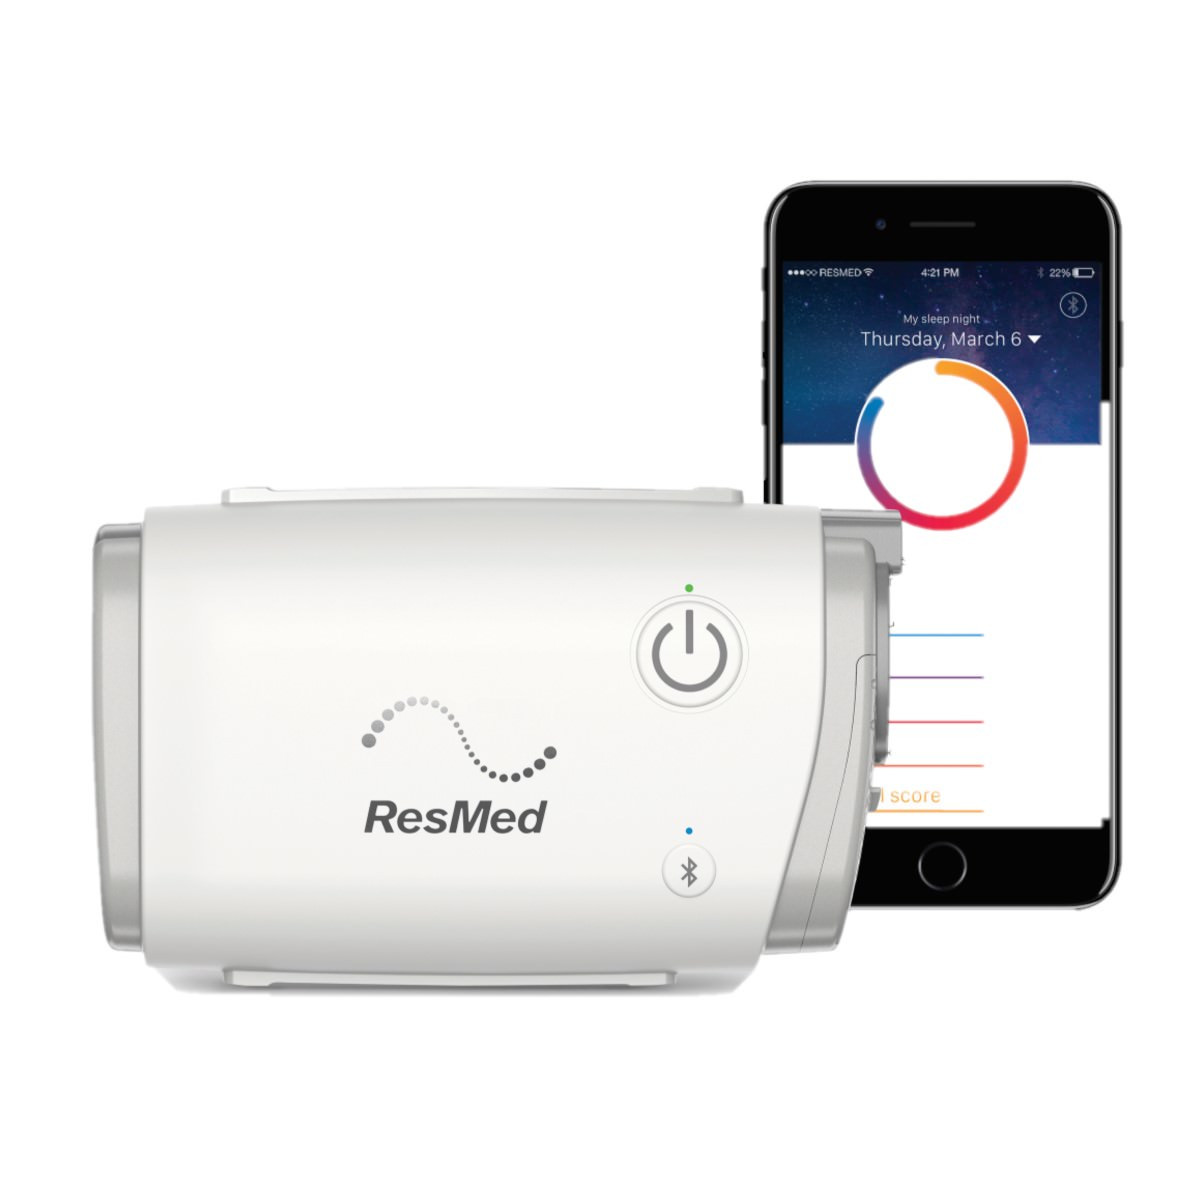 resmed travel cpap machine amazon